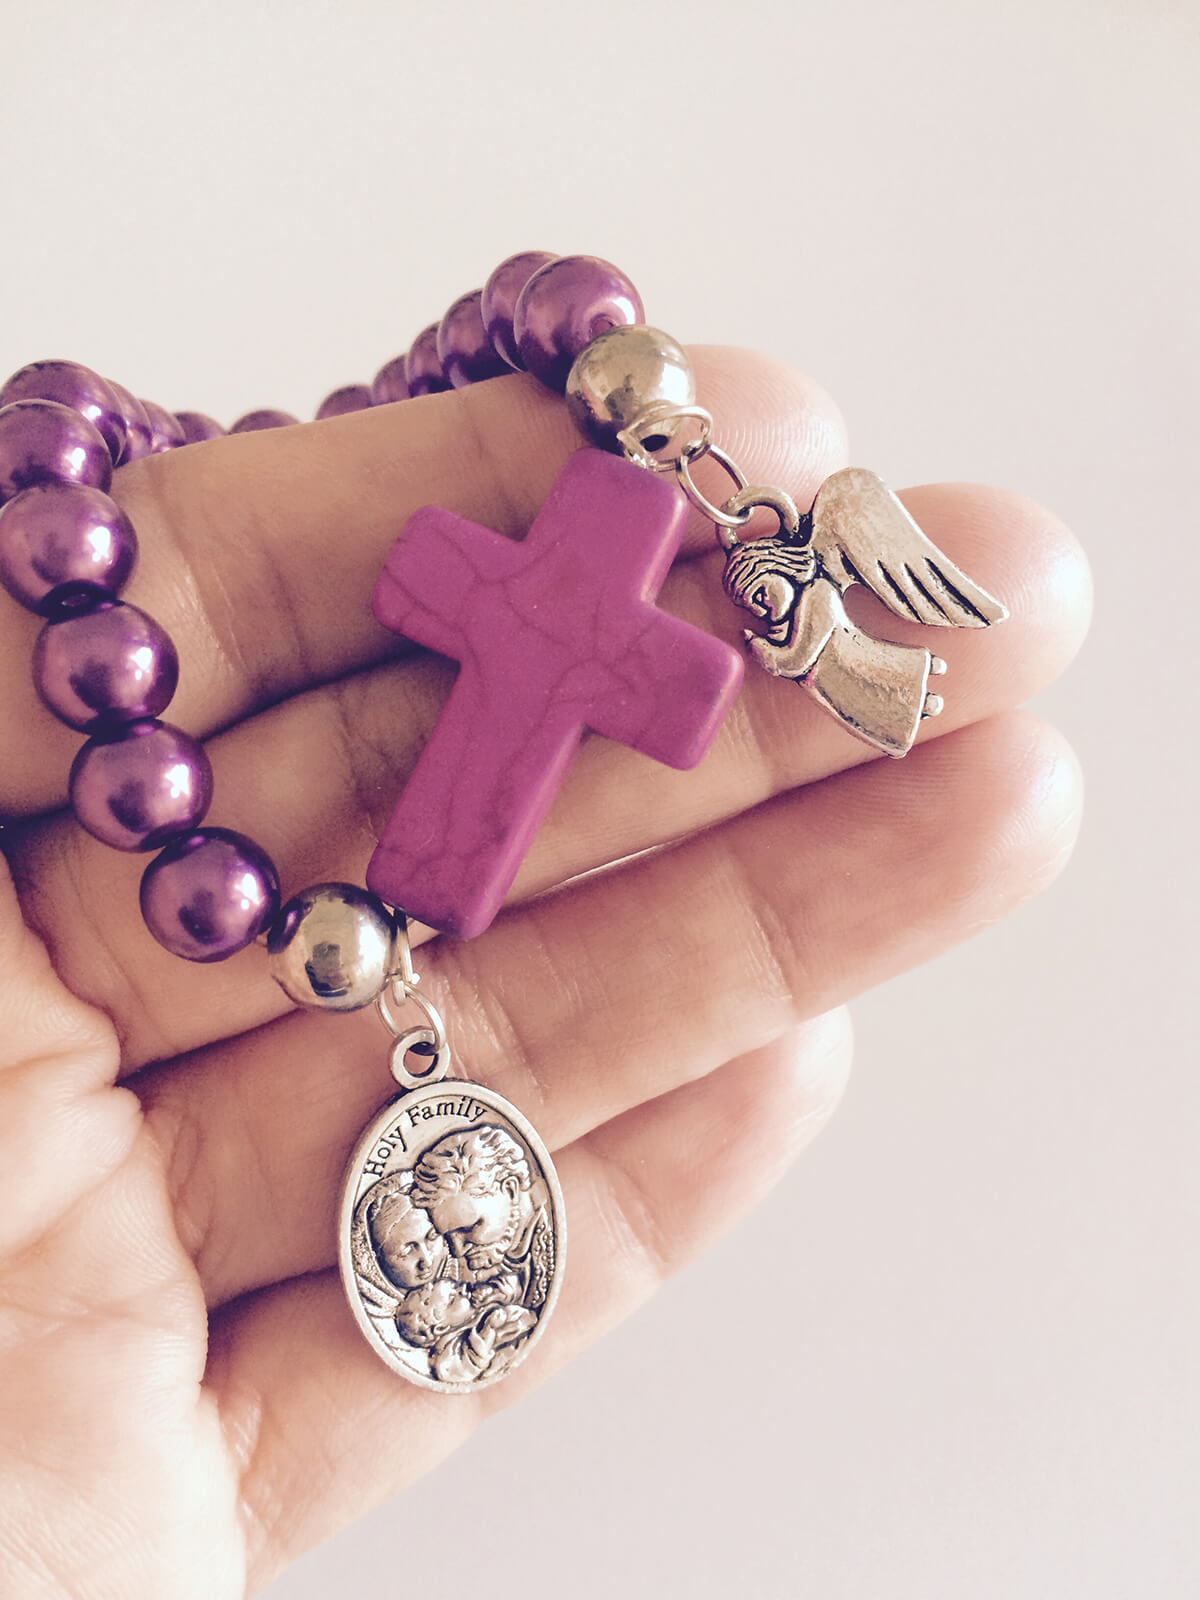 Religion and Faith - Woman praying the Rosary with a small purple rosary in her hand